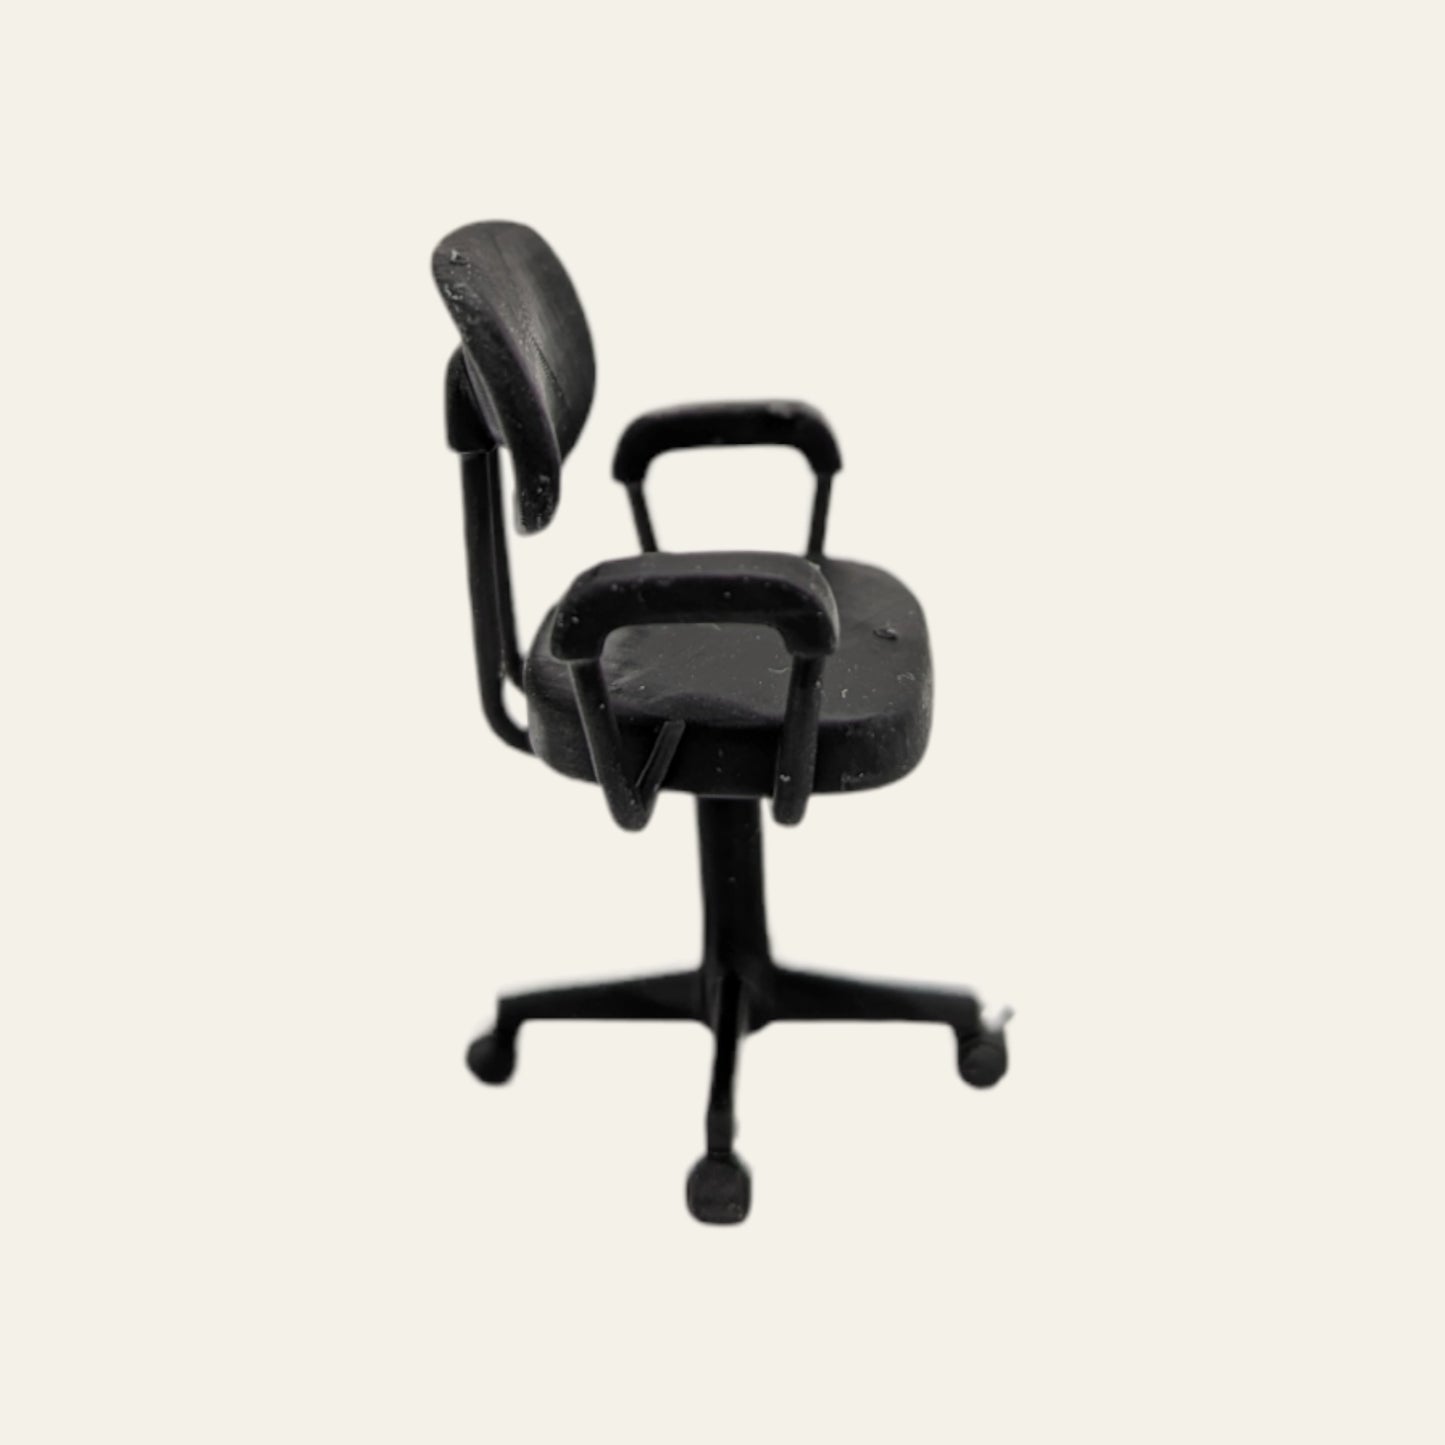 Scale model of a small office swivel chair